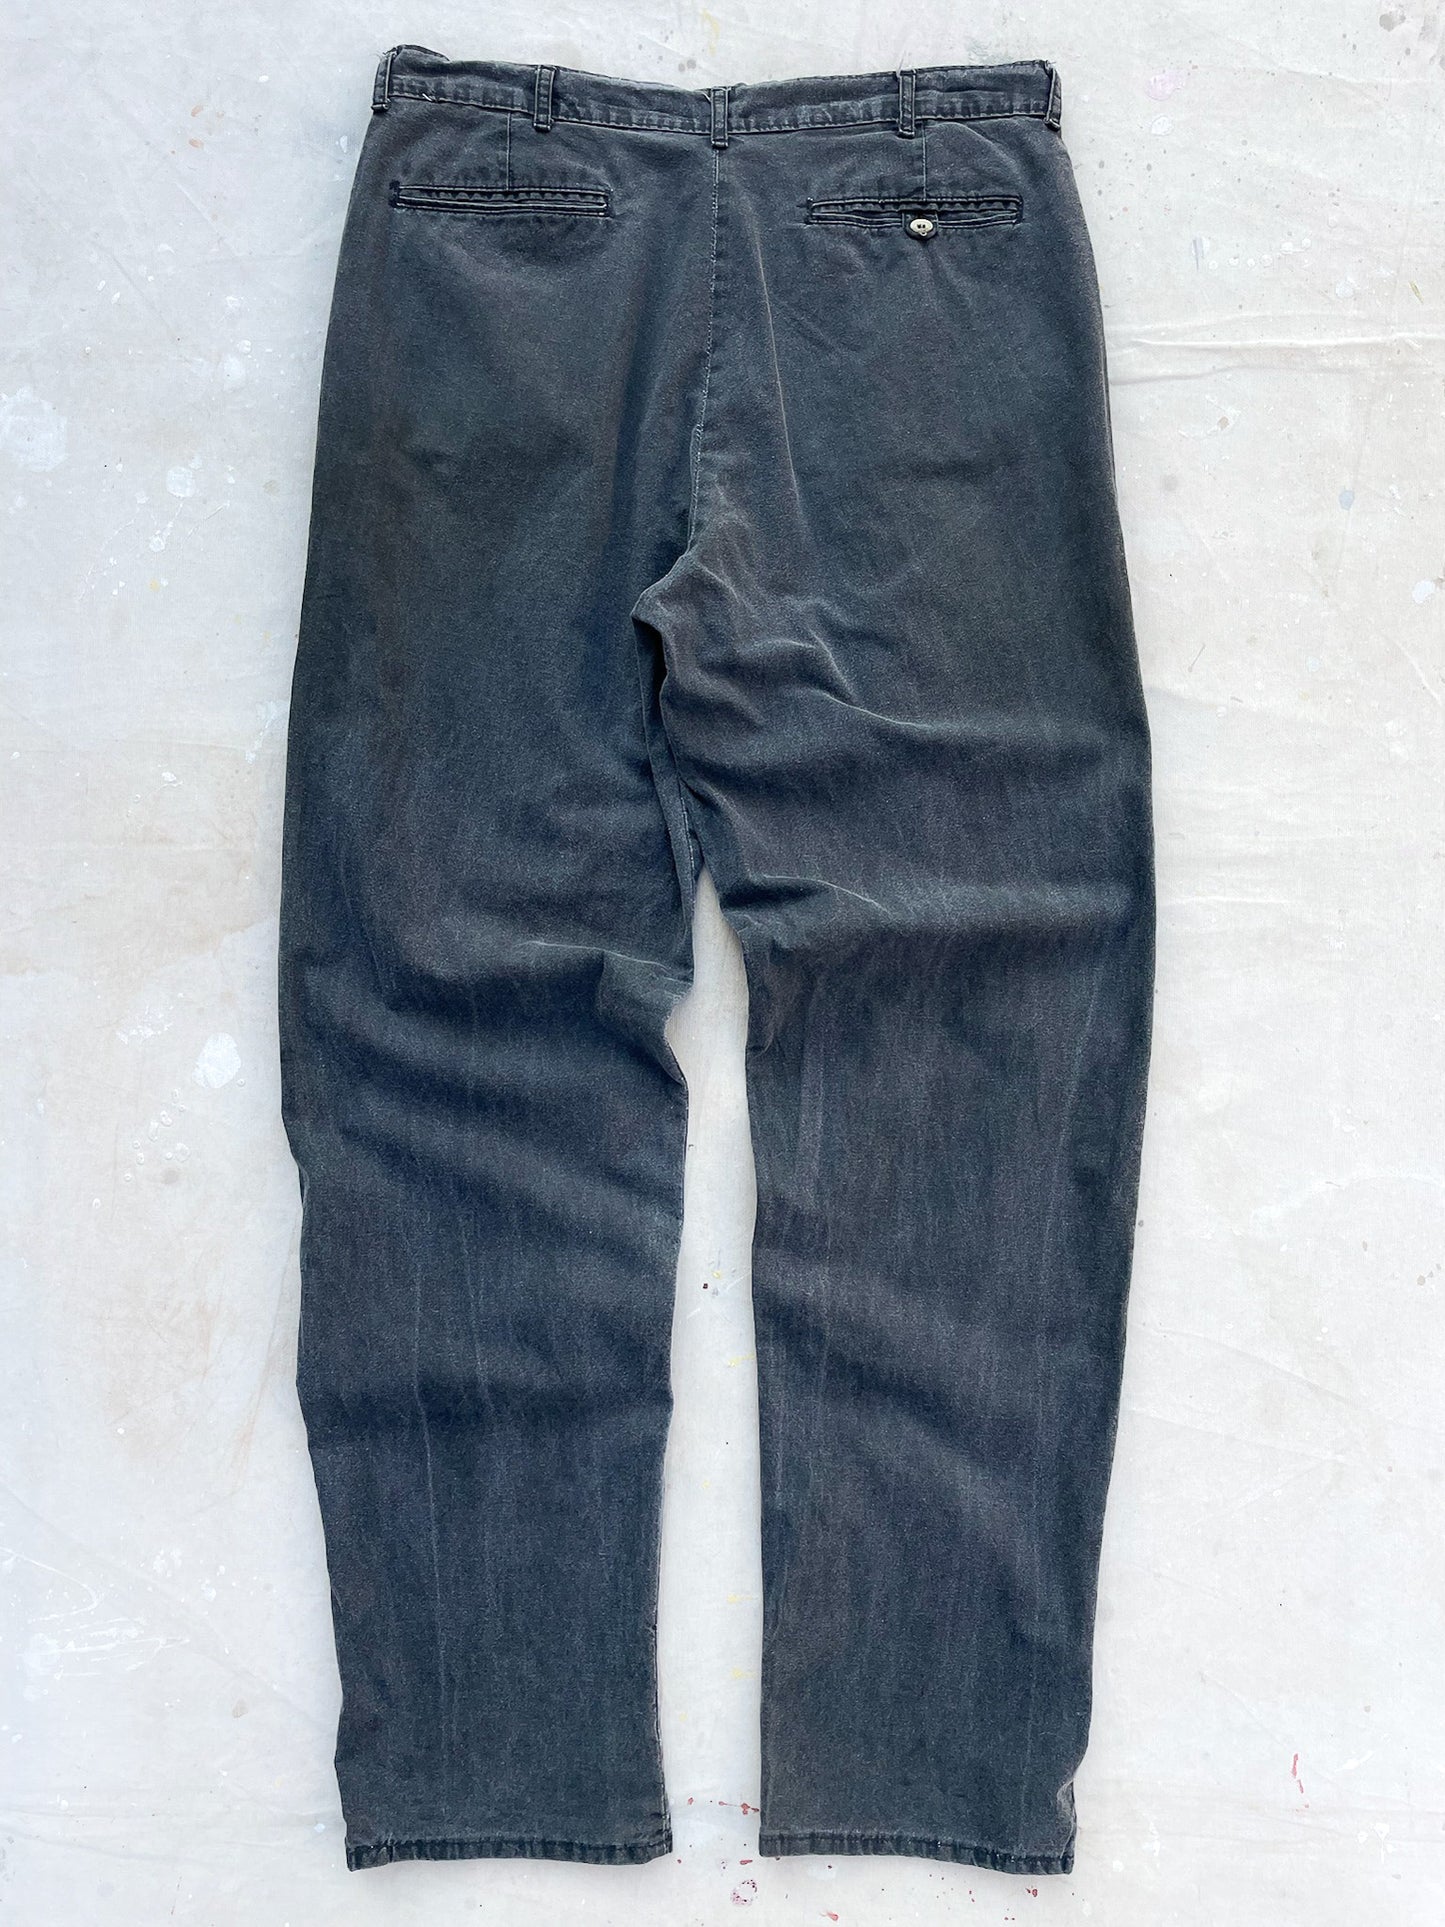 Woolrich Pleated Pants—[33x33]